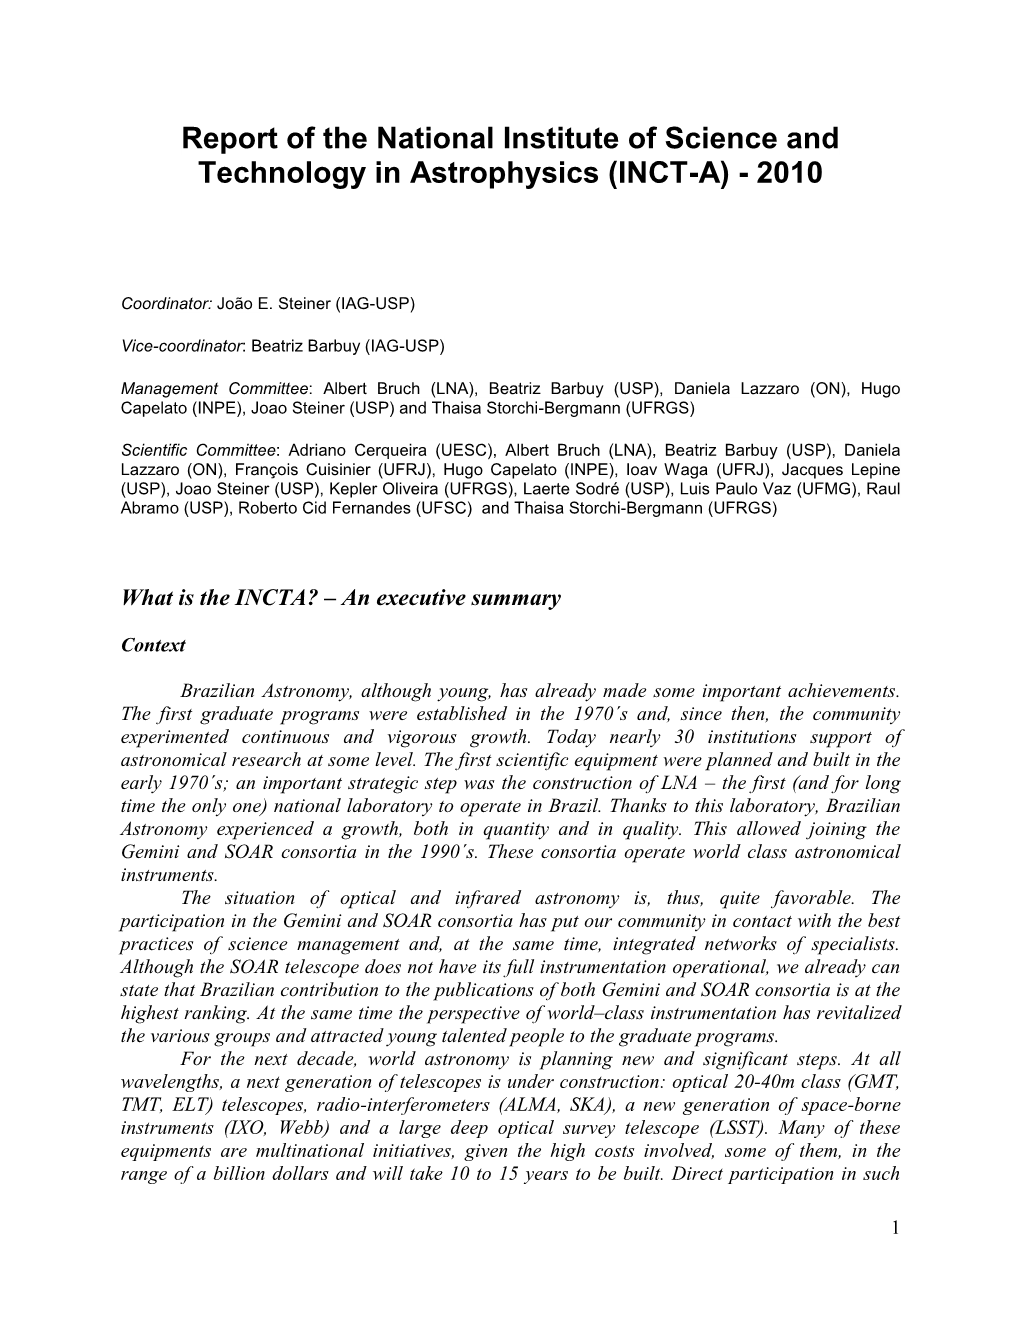 Report of the National Institute of Science and Technology in Astrophysics (INCT-A) - 2010